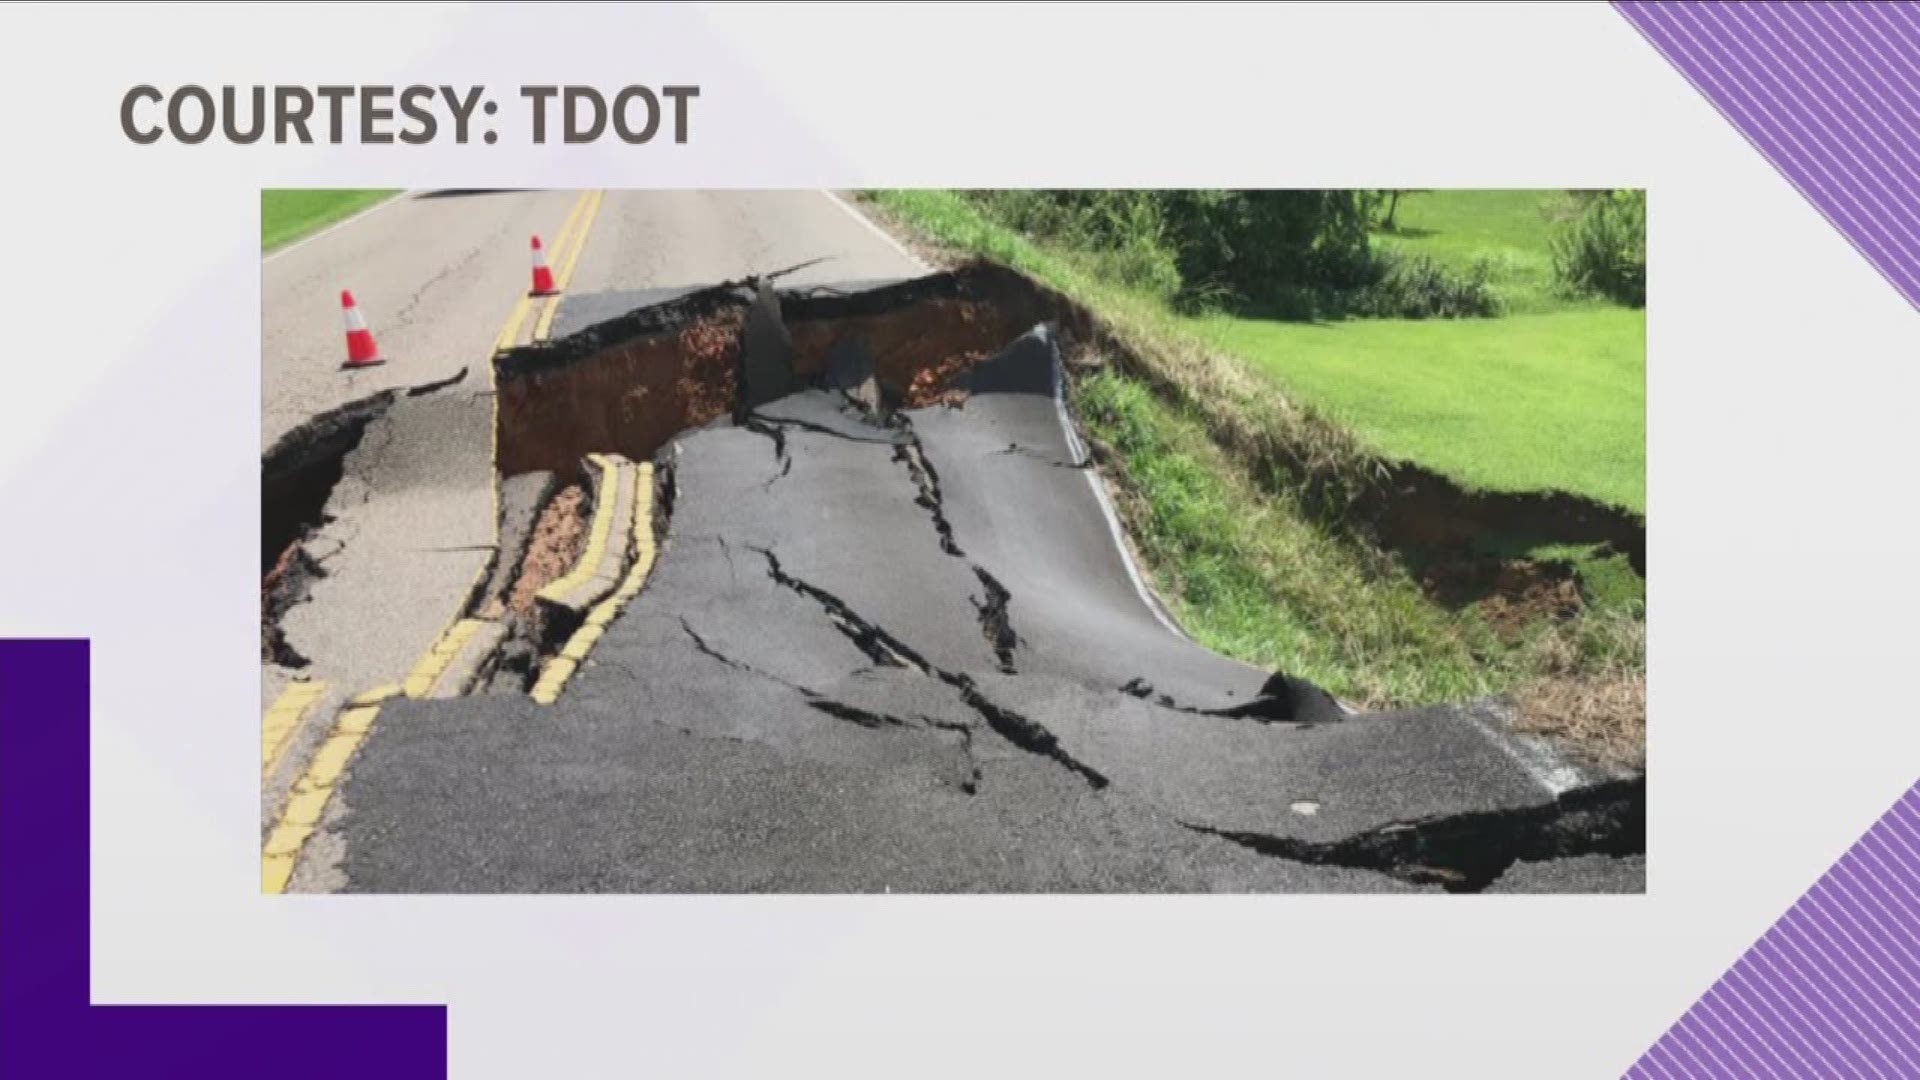 A large sinkhole has closed a portion of Lakeshore Drive in Grainger County.

A TDOT spokesperson shared a photo that shows one entire lane of the road has collapsed. Geotechnical engineers are on their way to assess the damage and figure out how to repair it.